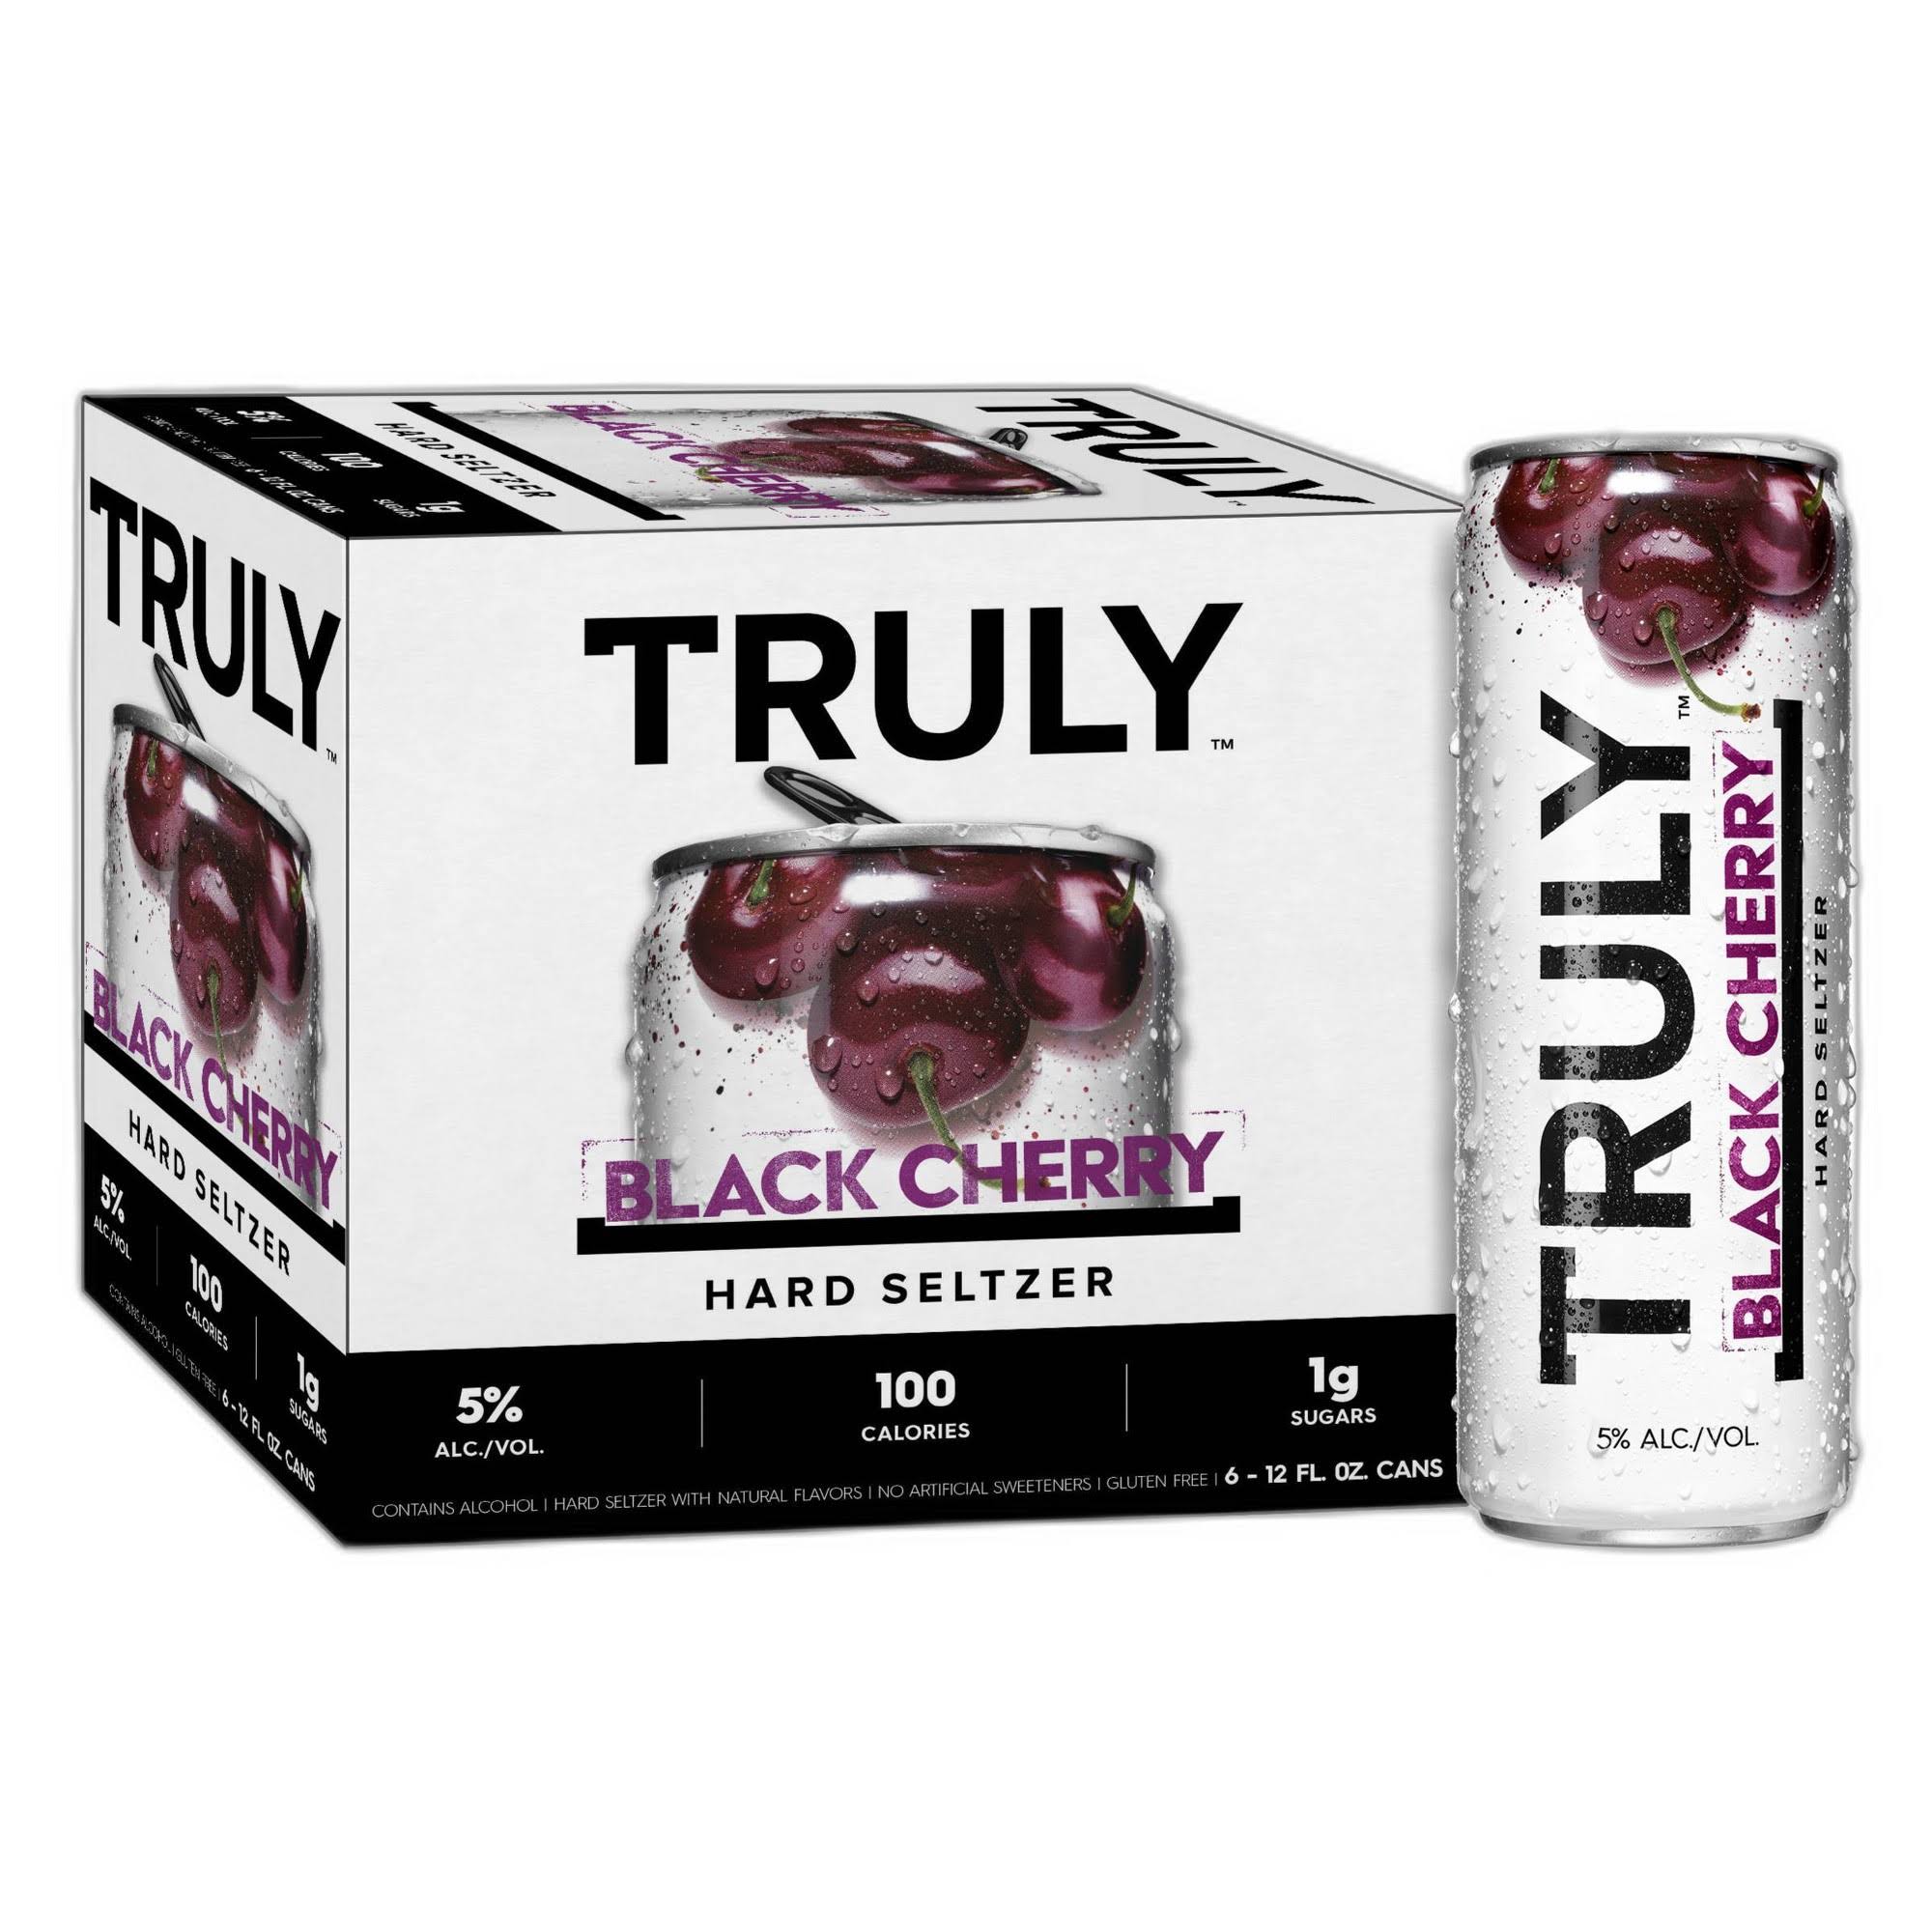 Truly Hard Seltzer, Black Cherry - 6 pack, 12 fl oz cans